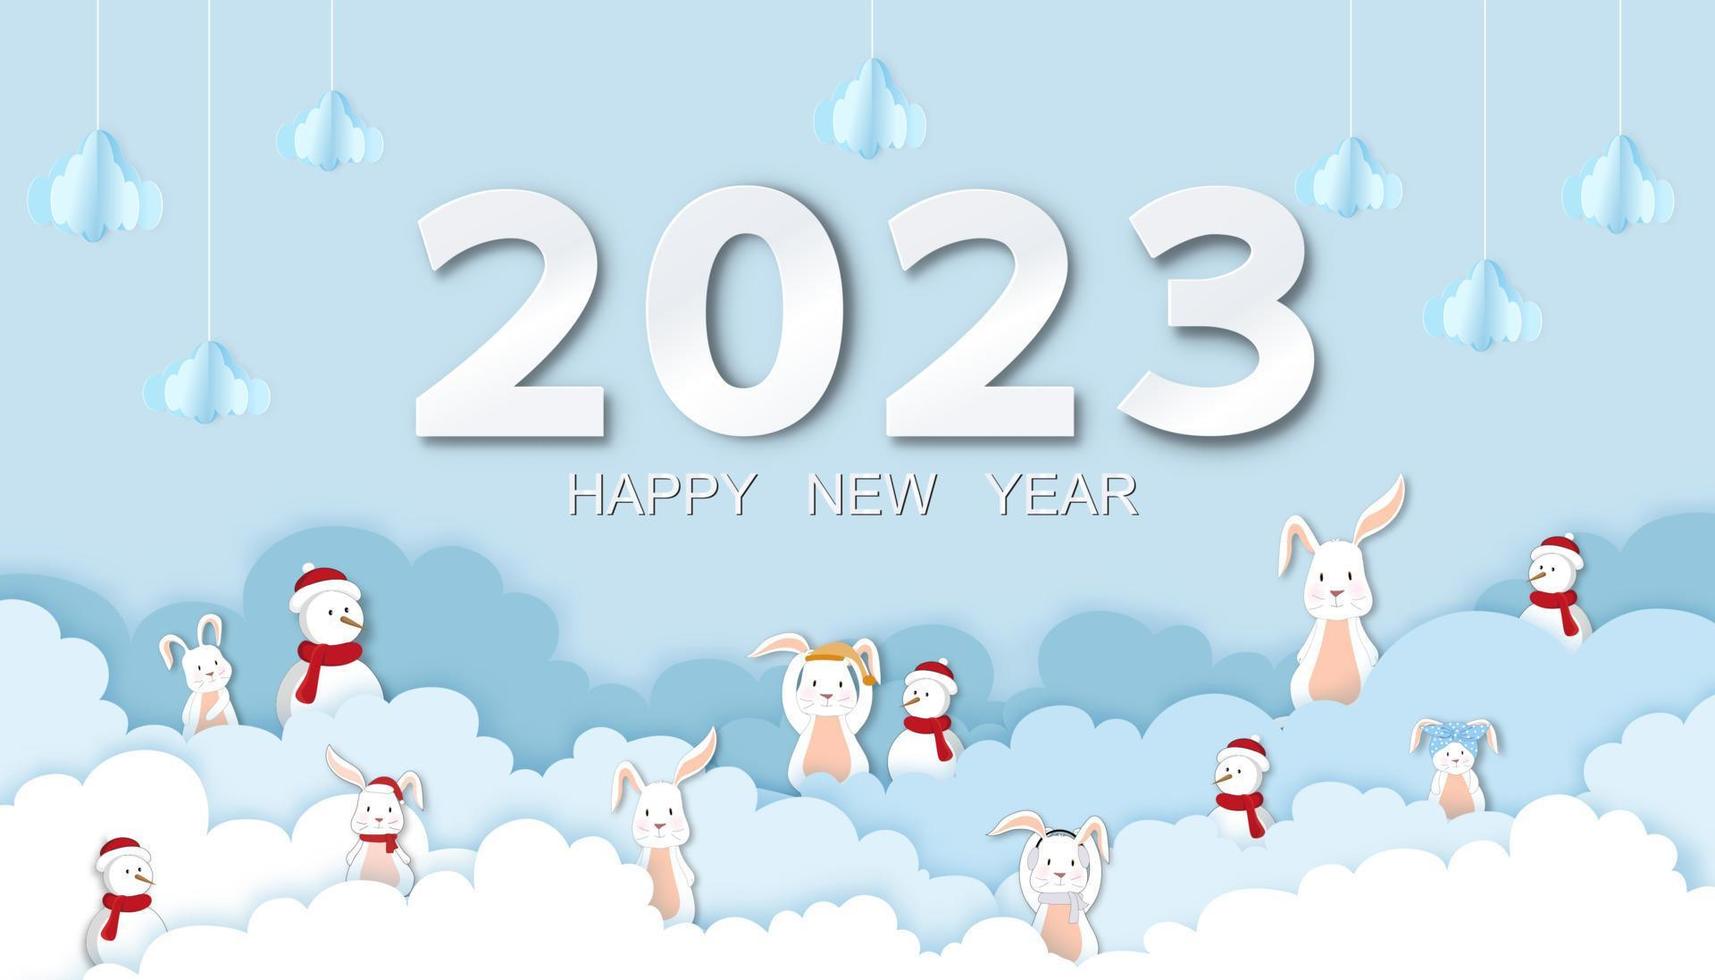 2023 Origami Cloud,Rabbit,Snowman on Blue Sky background, Vector illustration Cloudscape layers 3D paper art style with Horizontal banner, backdrop, calendar for Happy New Year 2023, Year of Rabbit